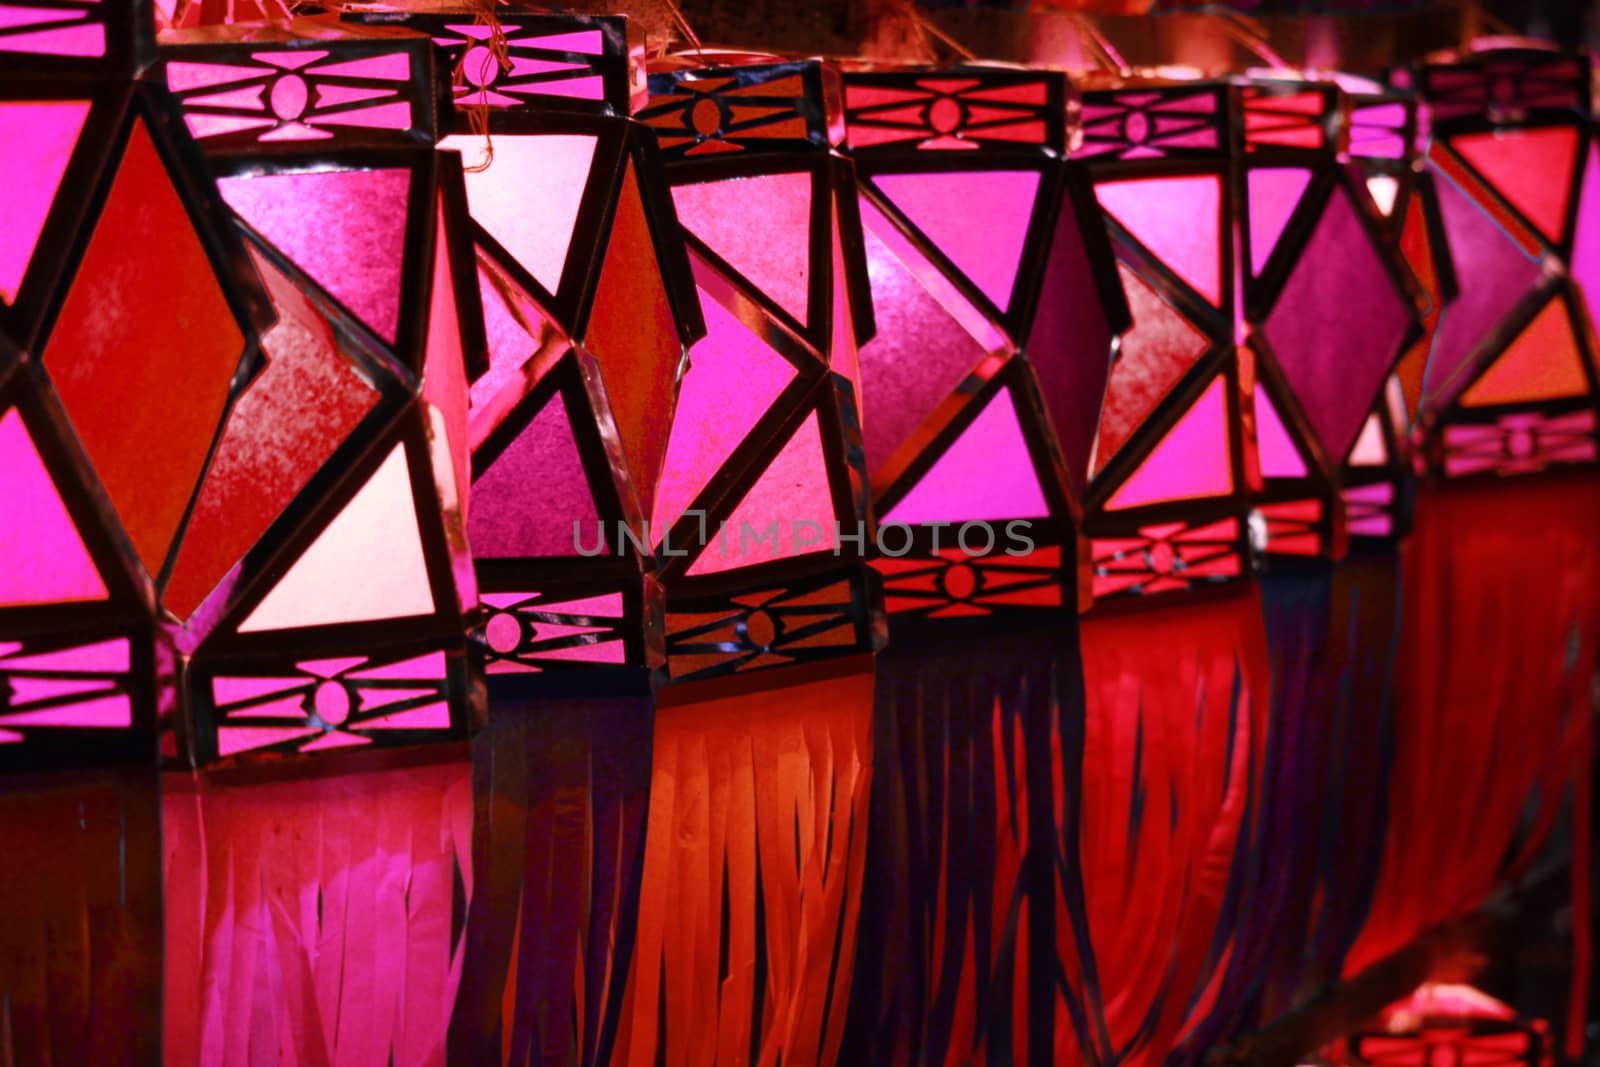 A line of traditional handmade Diwali lanters in red color used for decoration in the hindu festival in India.